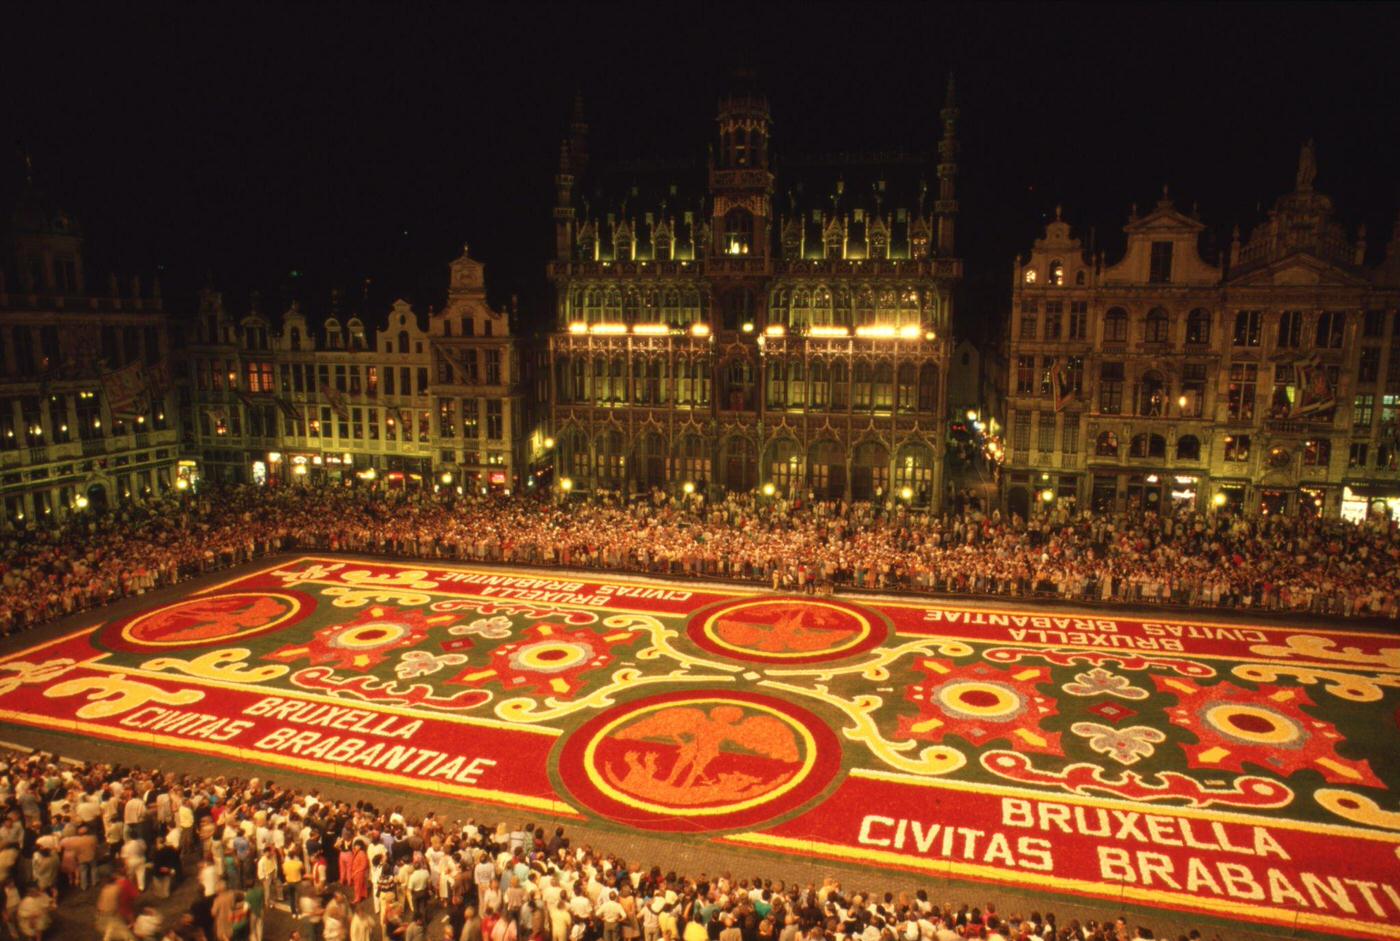 Festival at the Grand Place in Brussels, Belgium, 1986.